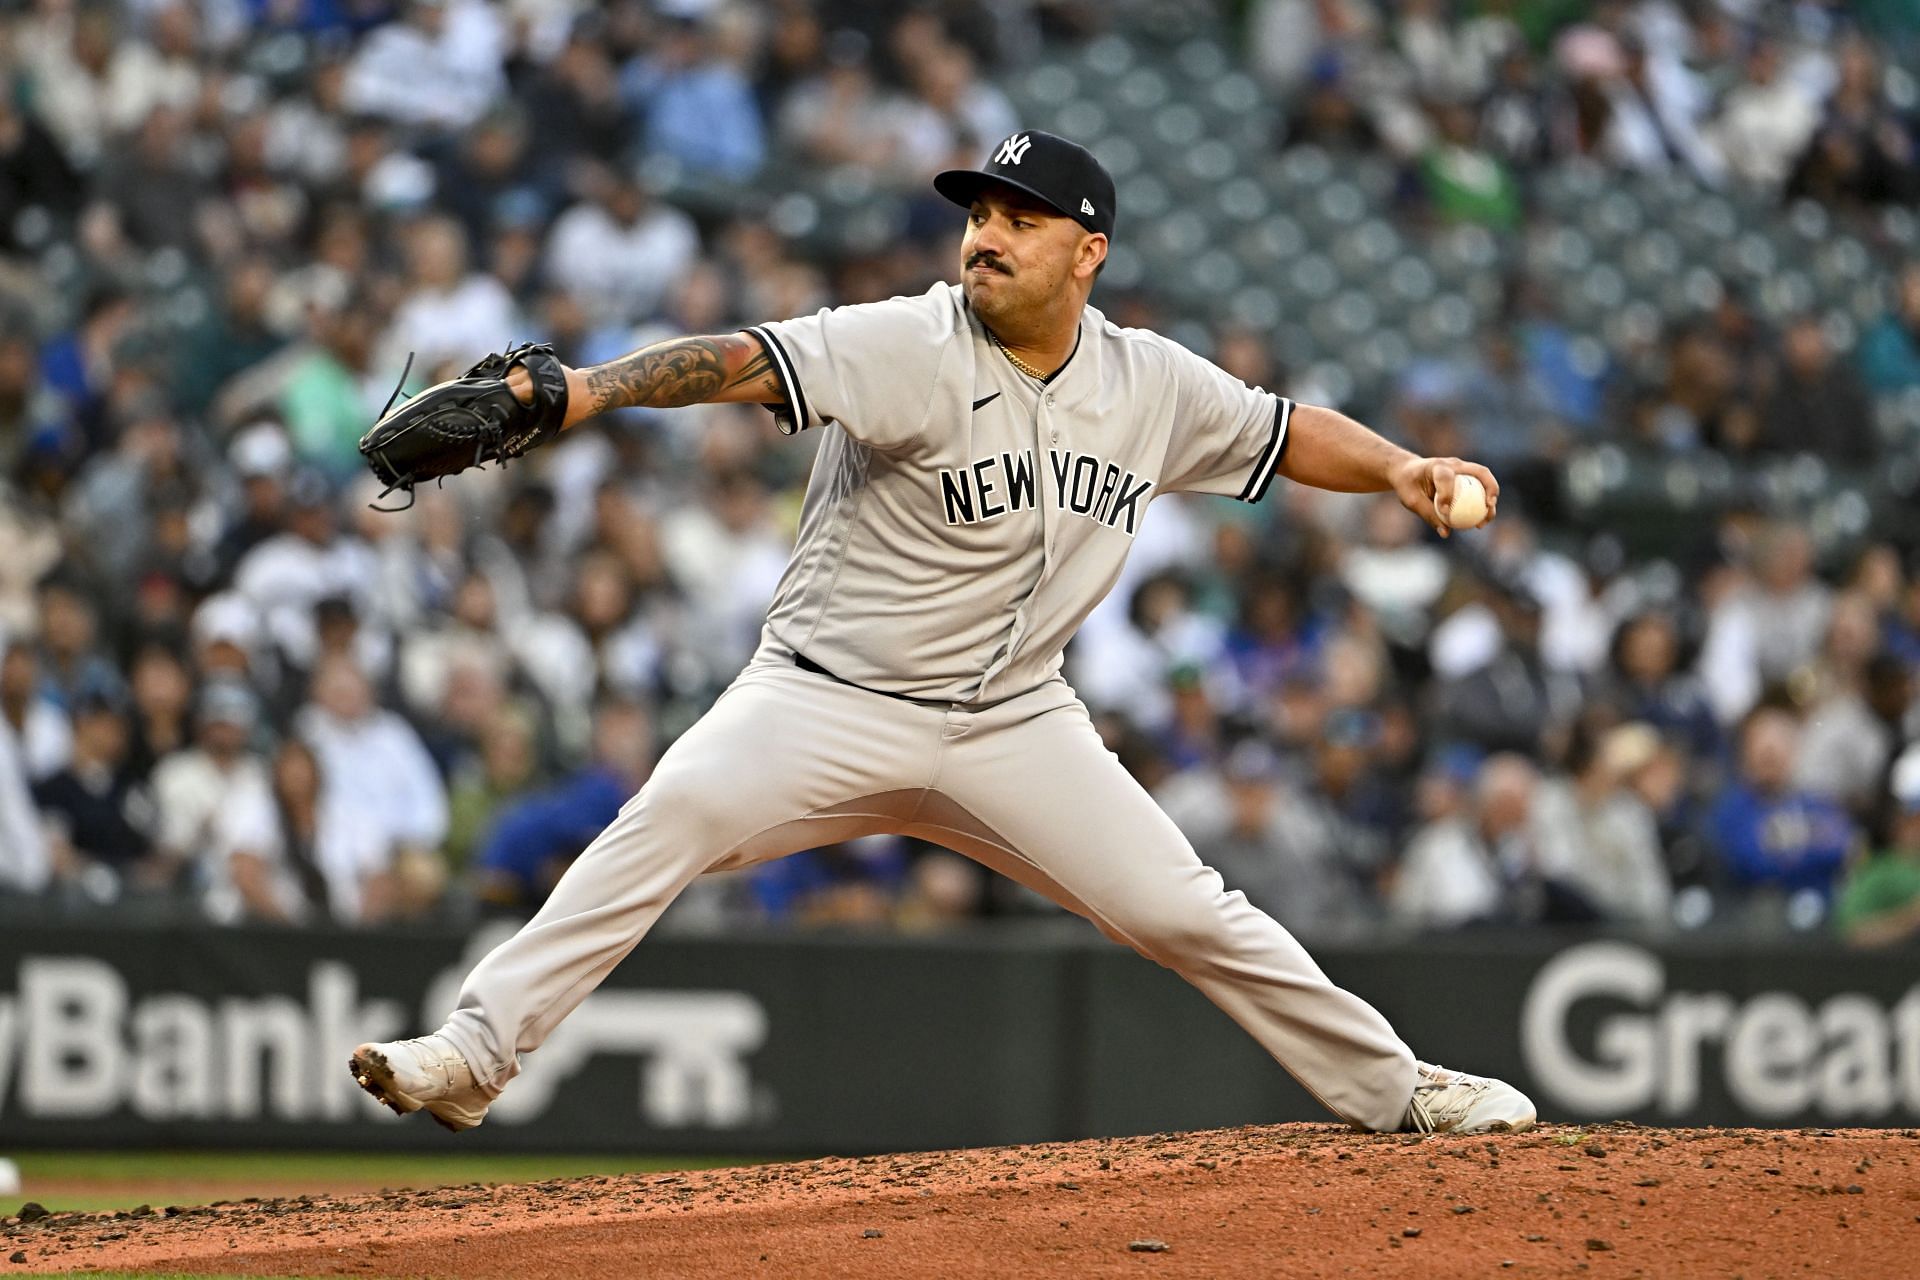 Nestor Cortes will get the start on Yankees Opening Day